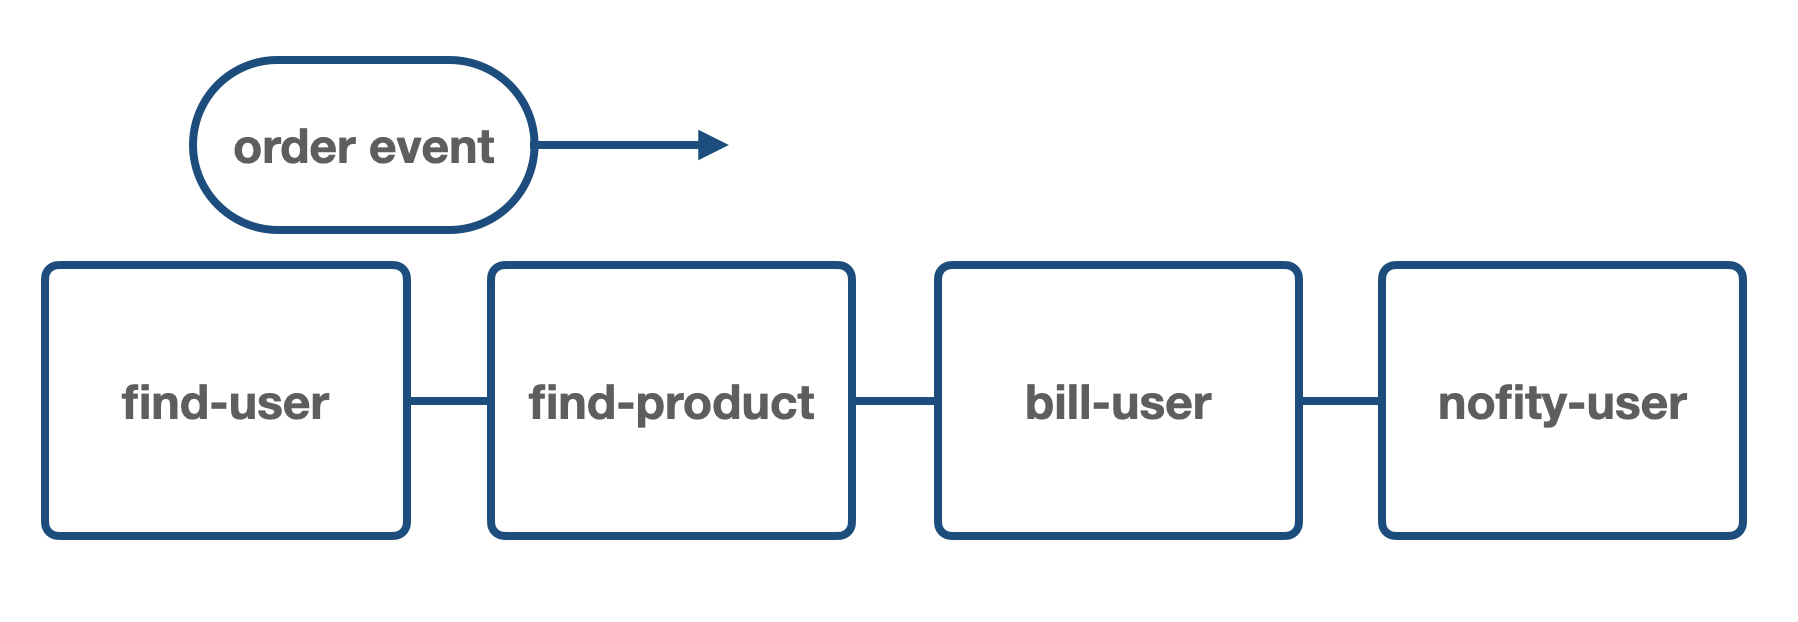 user-orders-a-product pipeline